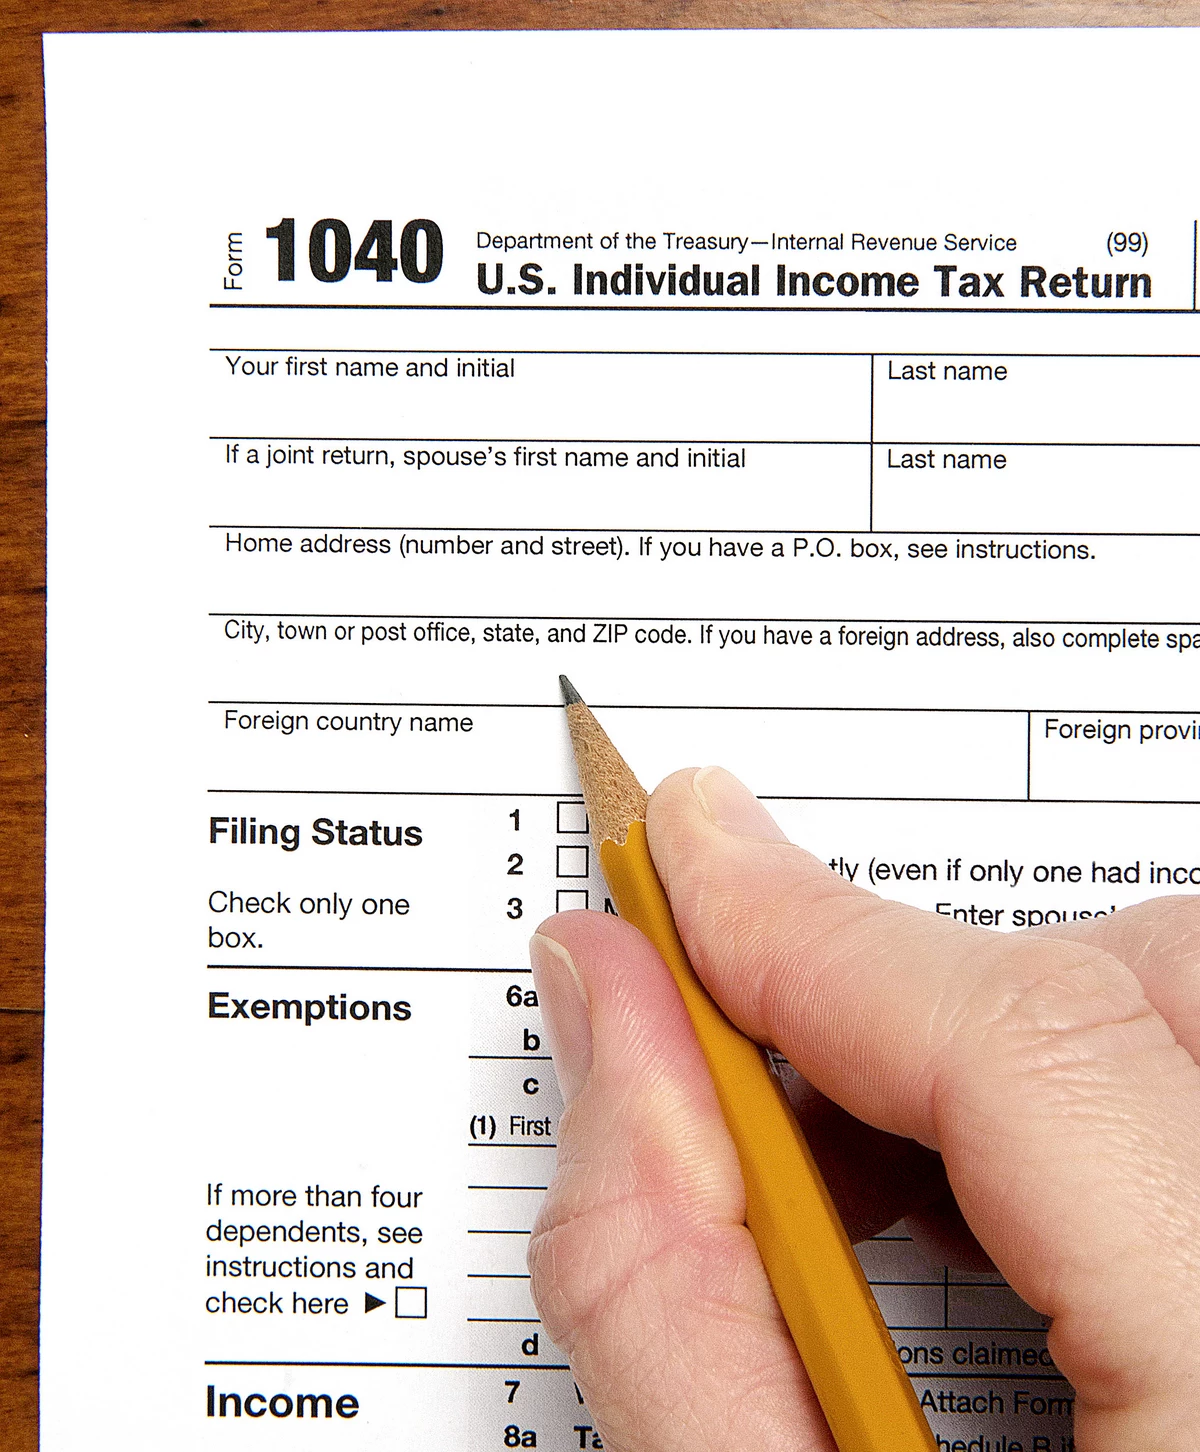 can-you-do-your-own-tax-return-online-how-to-file-your-own-taxes-it